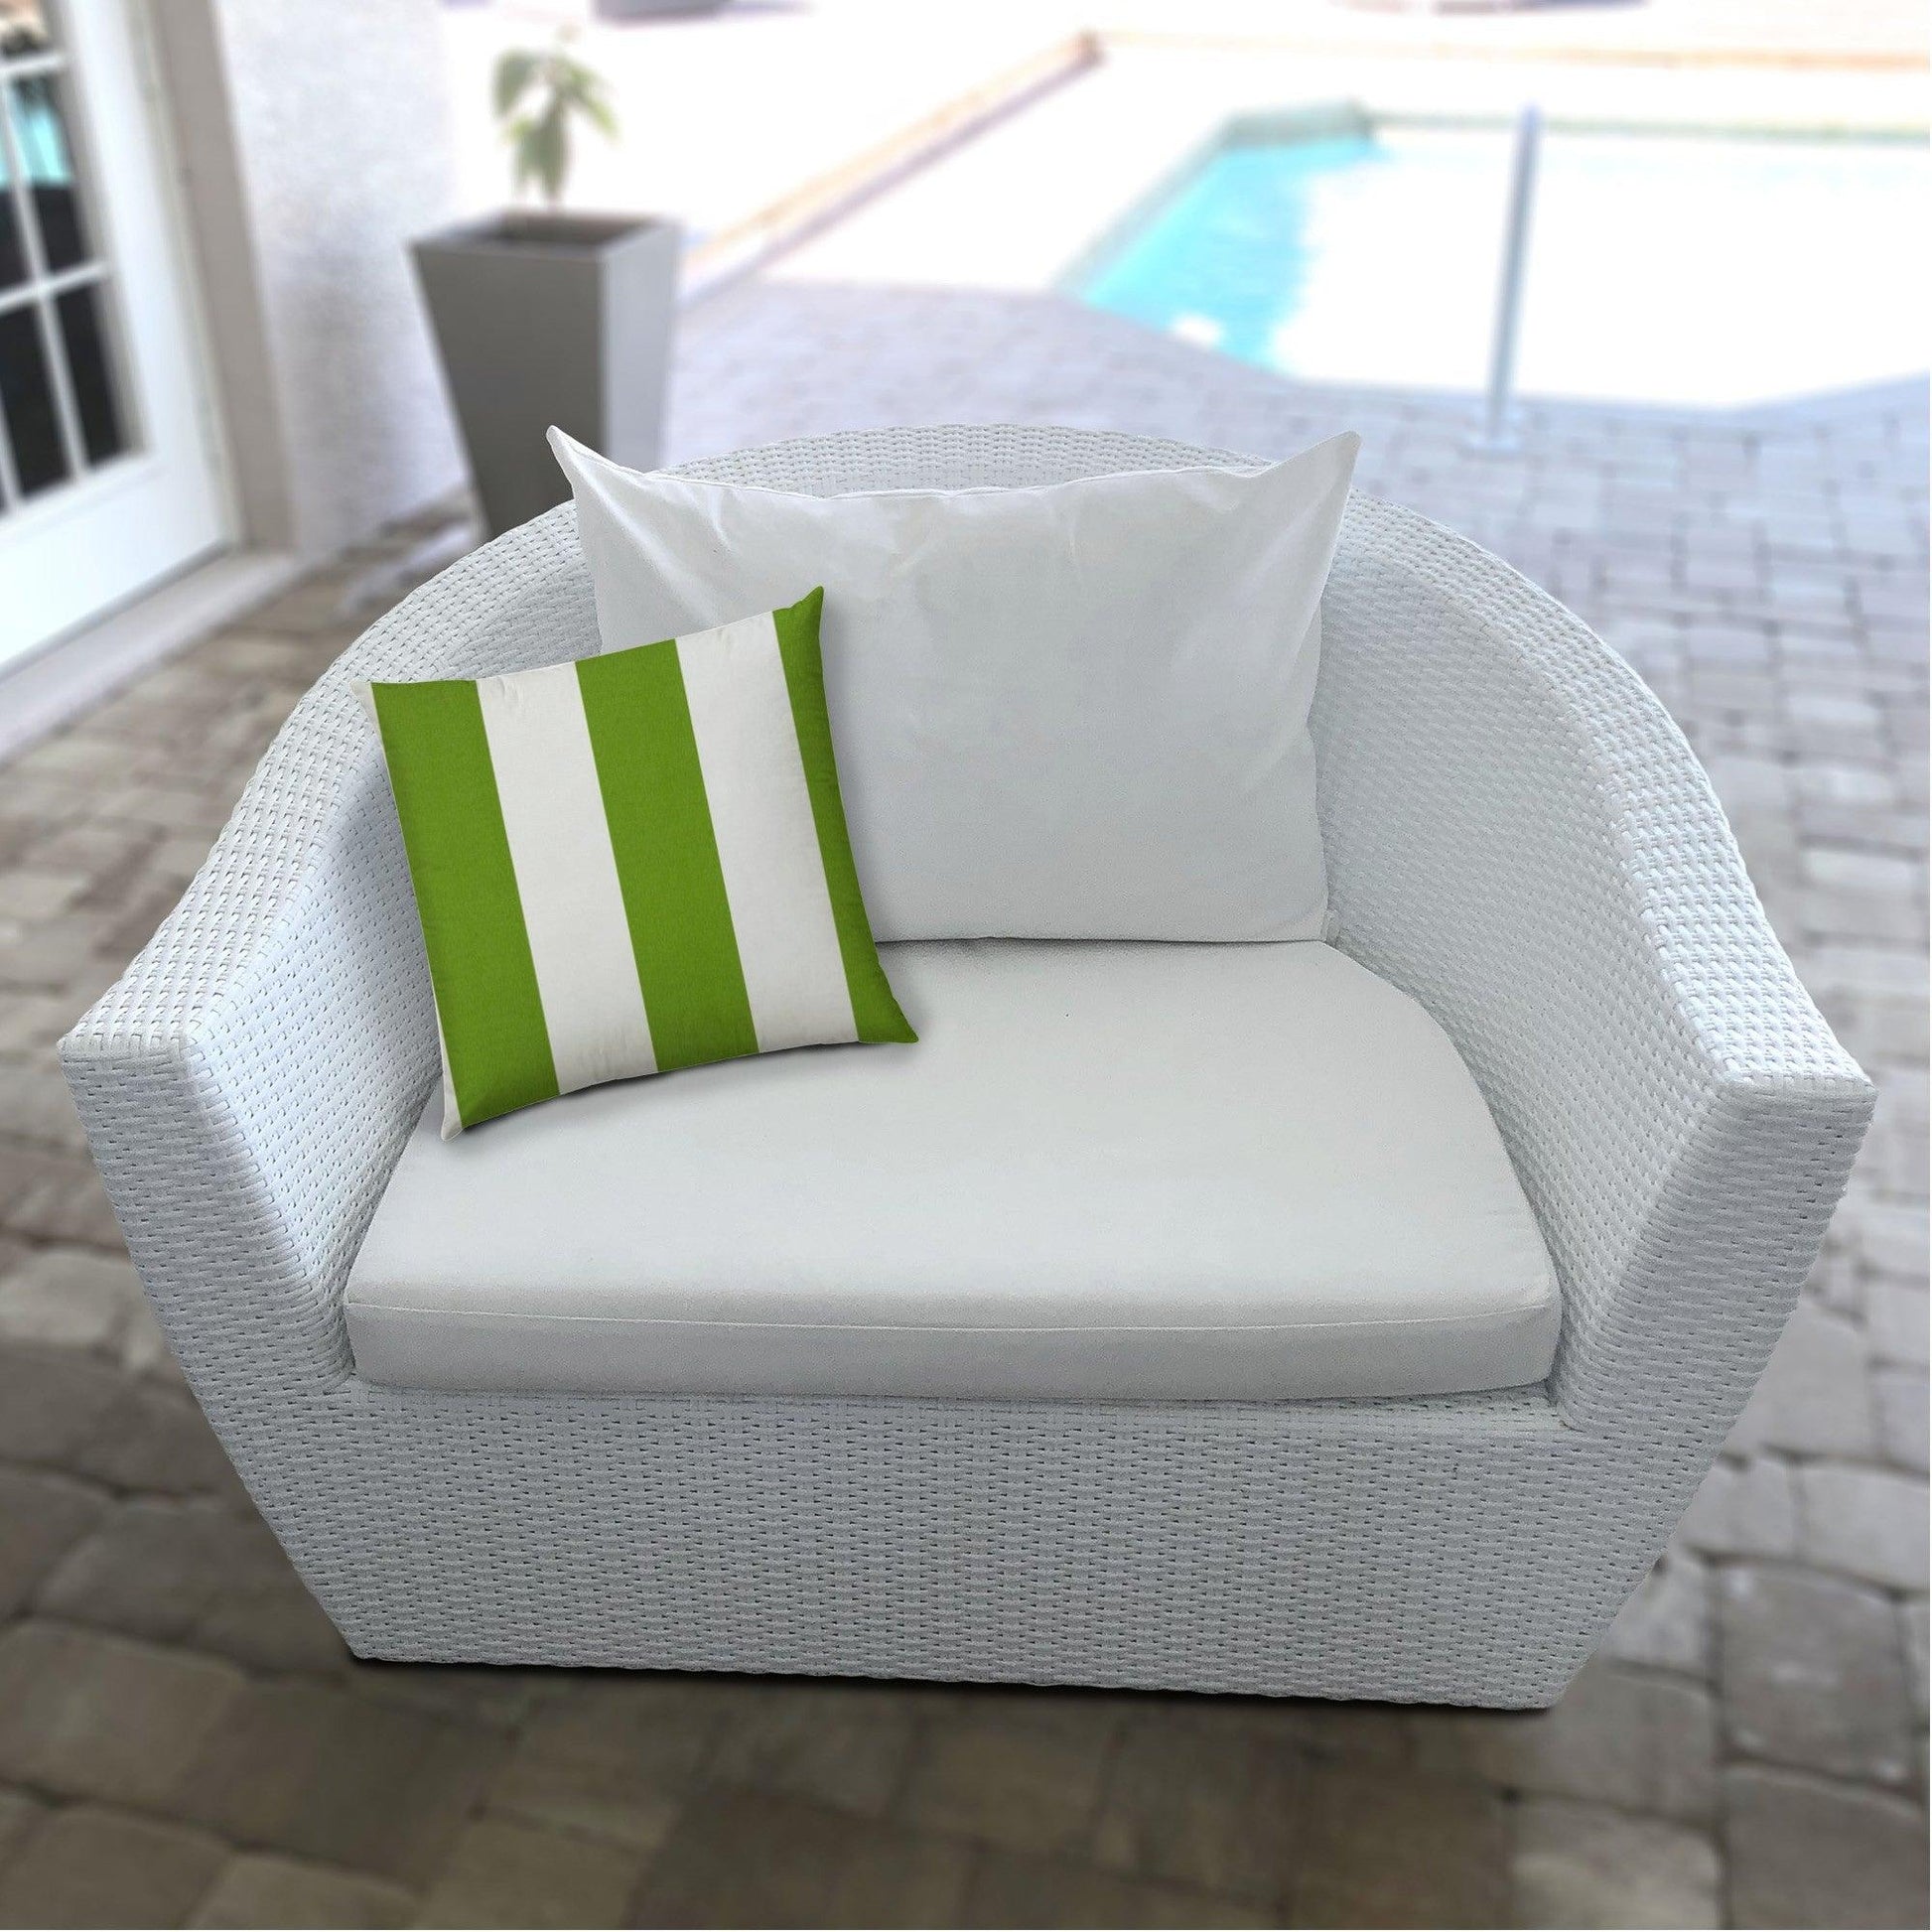 14" X 20" Green And Ivory Blown Seam Striped Lumbar Indoor Outdoor Pillow - FurniFindUSA